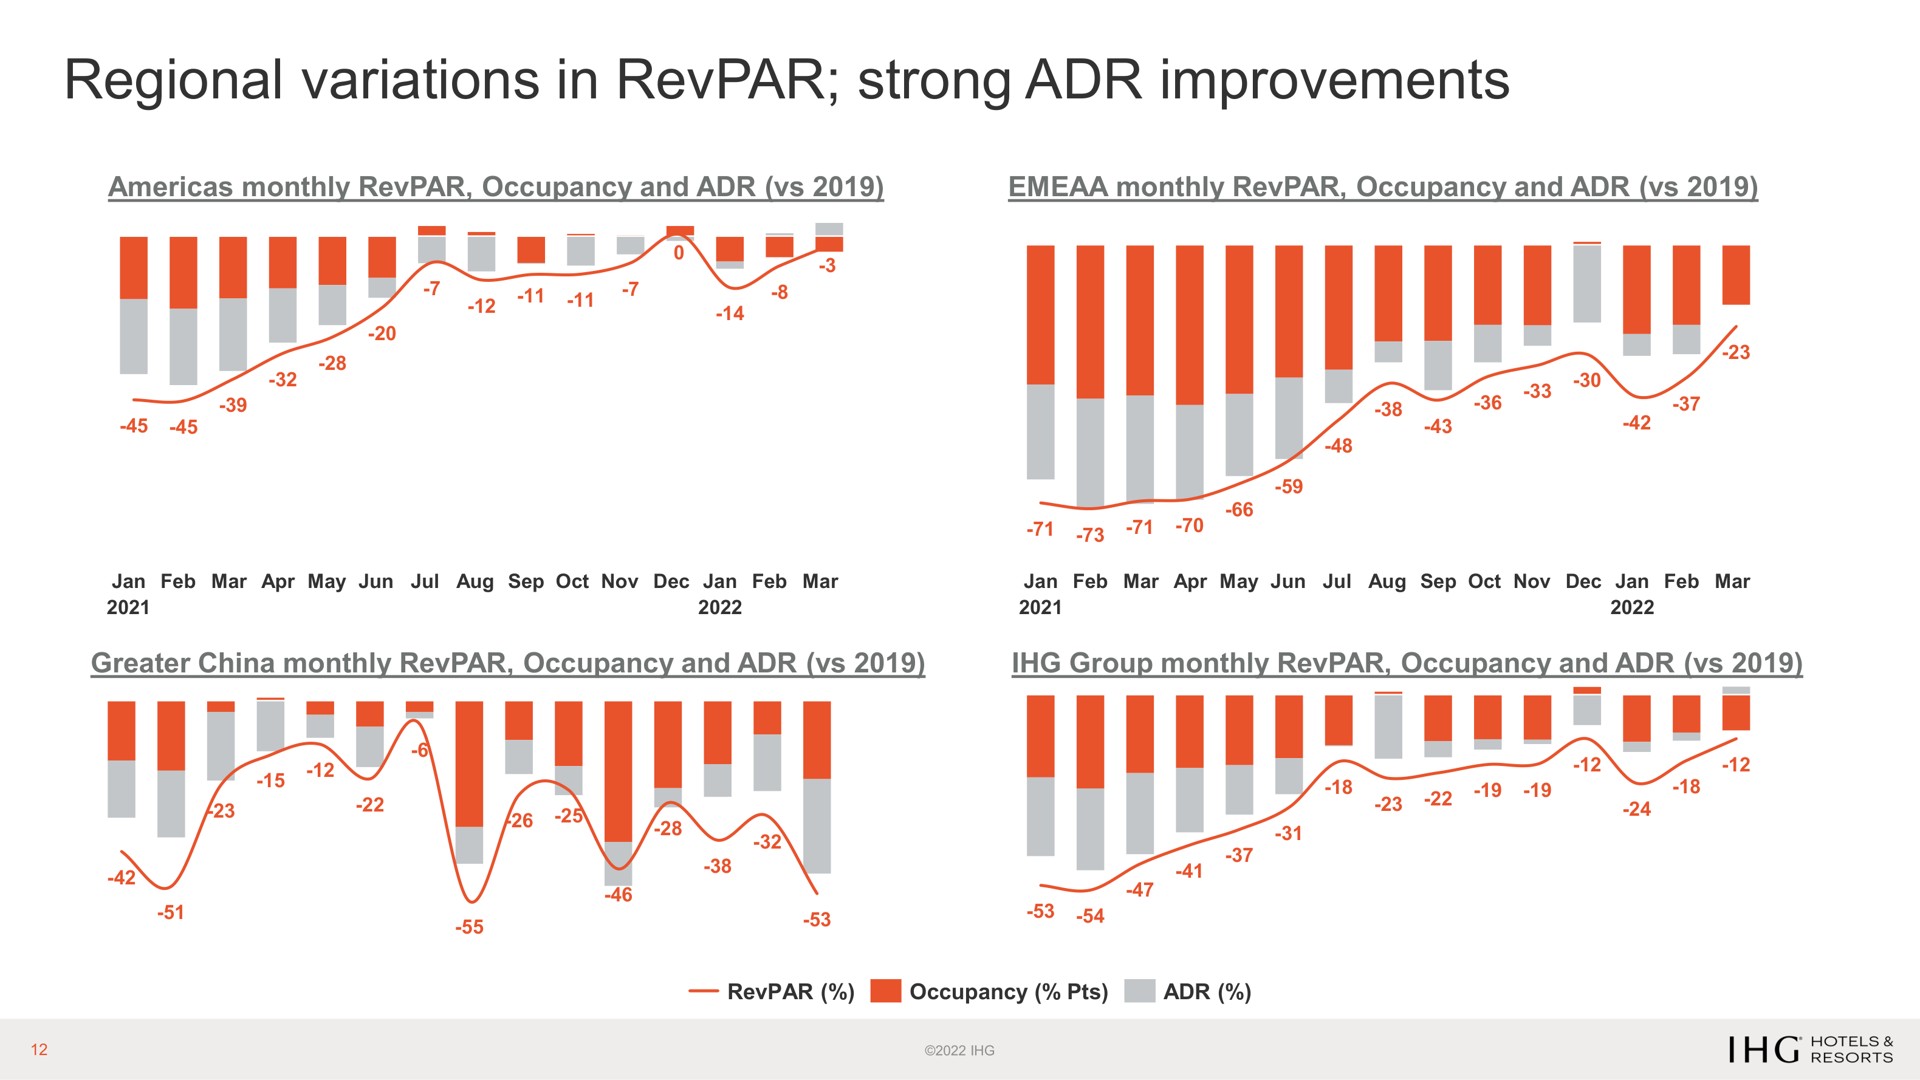 regional variations in strong improvements pon | IHG Hotels